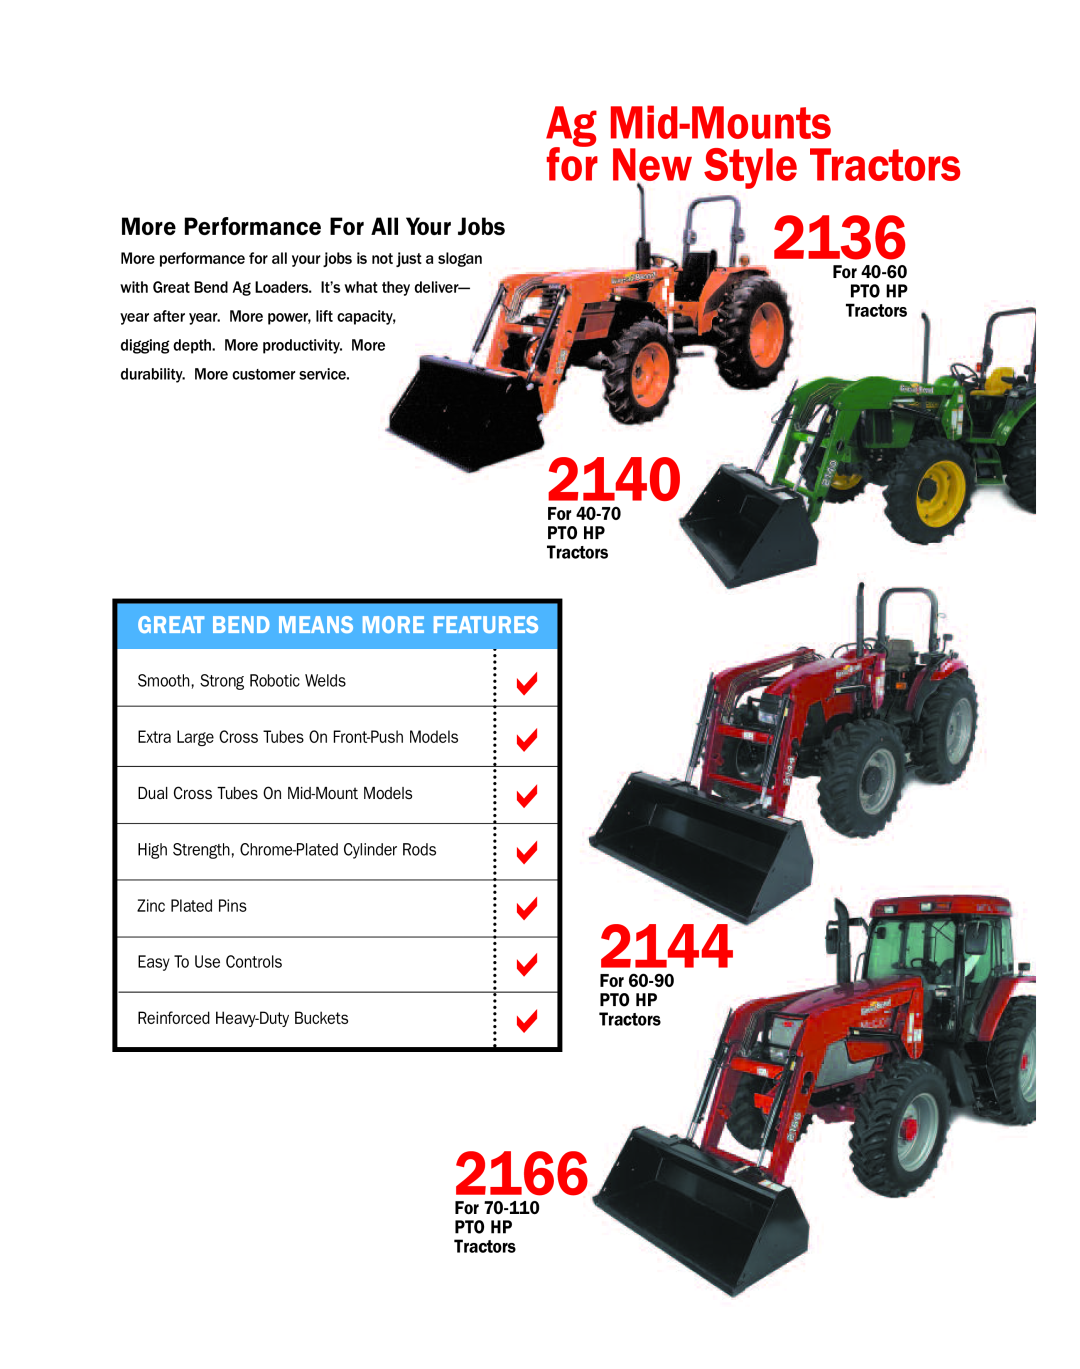 Bush Hog Ag Loader manual More Performance For All Your Jobs, 2136, 2140, 2144, 2166, Ag Mid-Mounts for New Style Tractors 